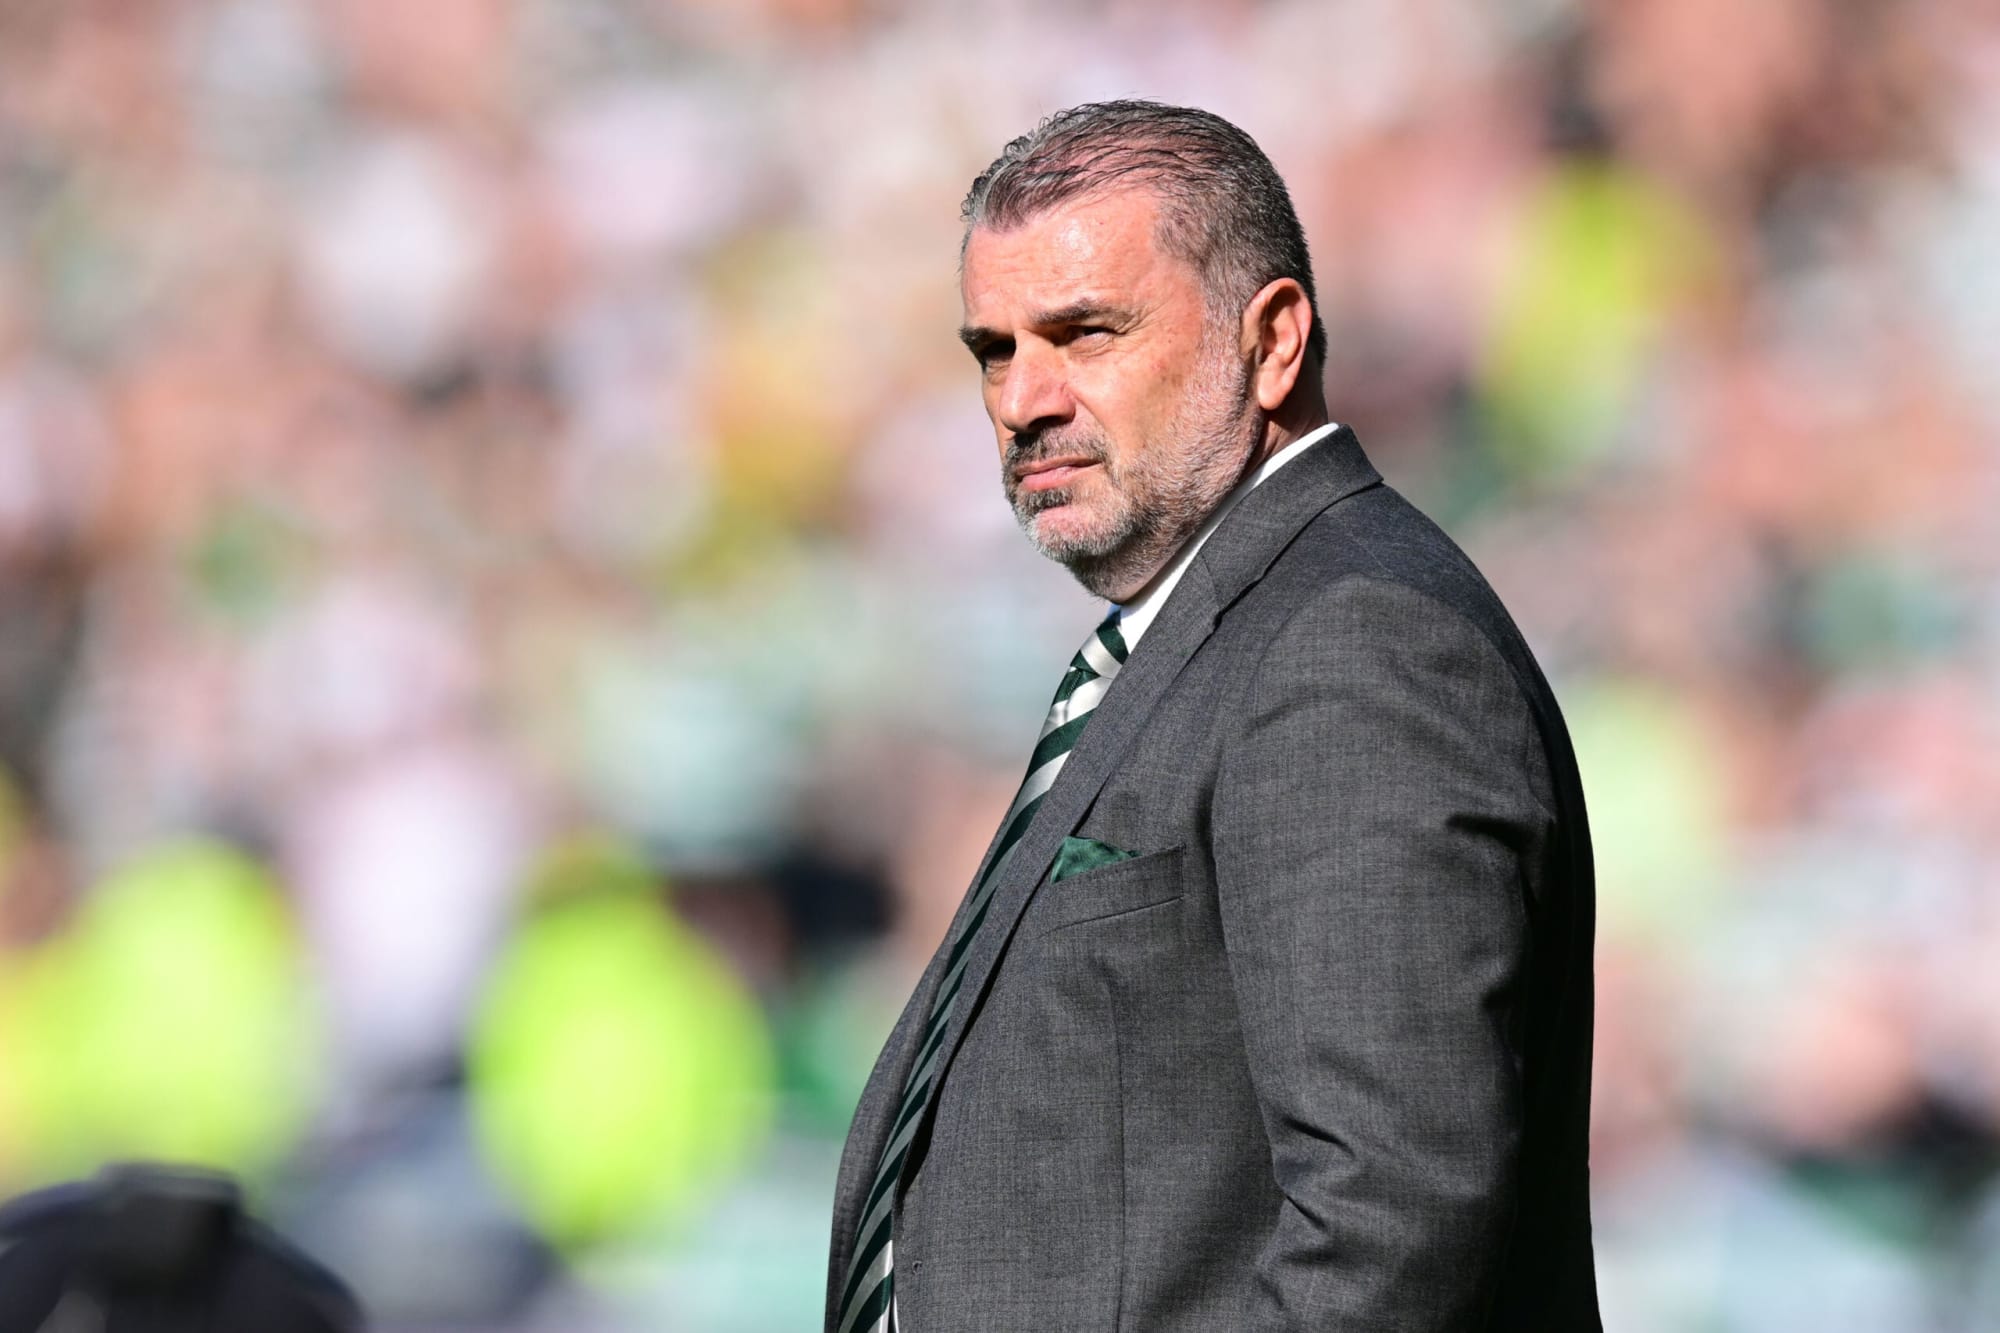 Ange Postecoglou rejected three Premier League clubs to stay at Celtic